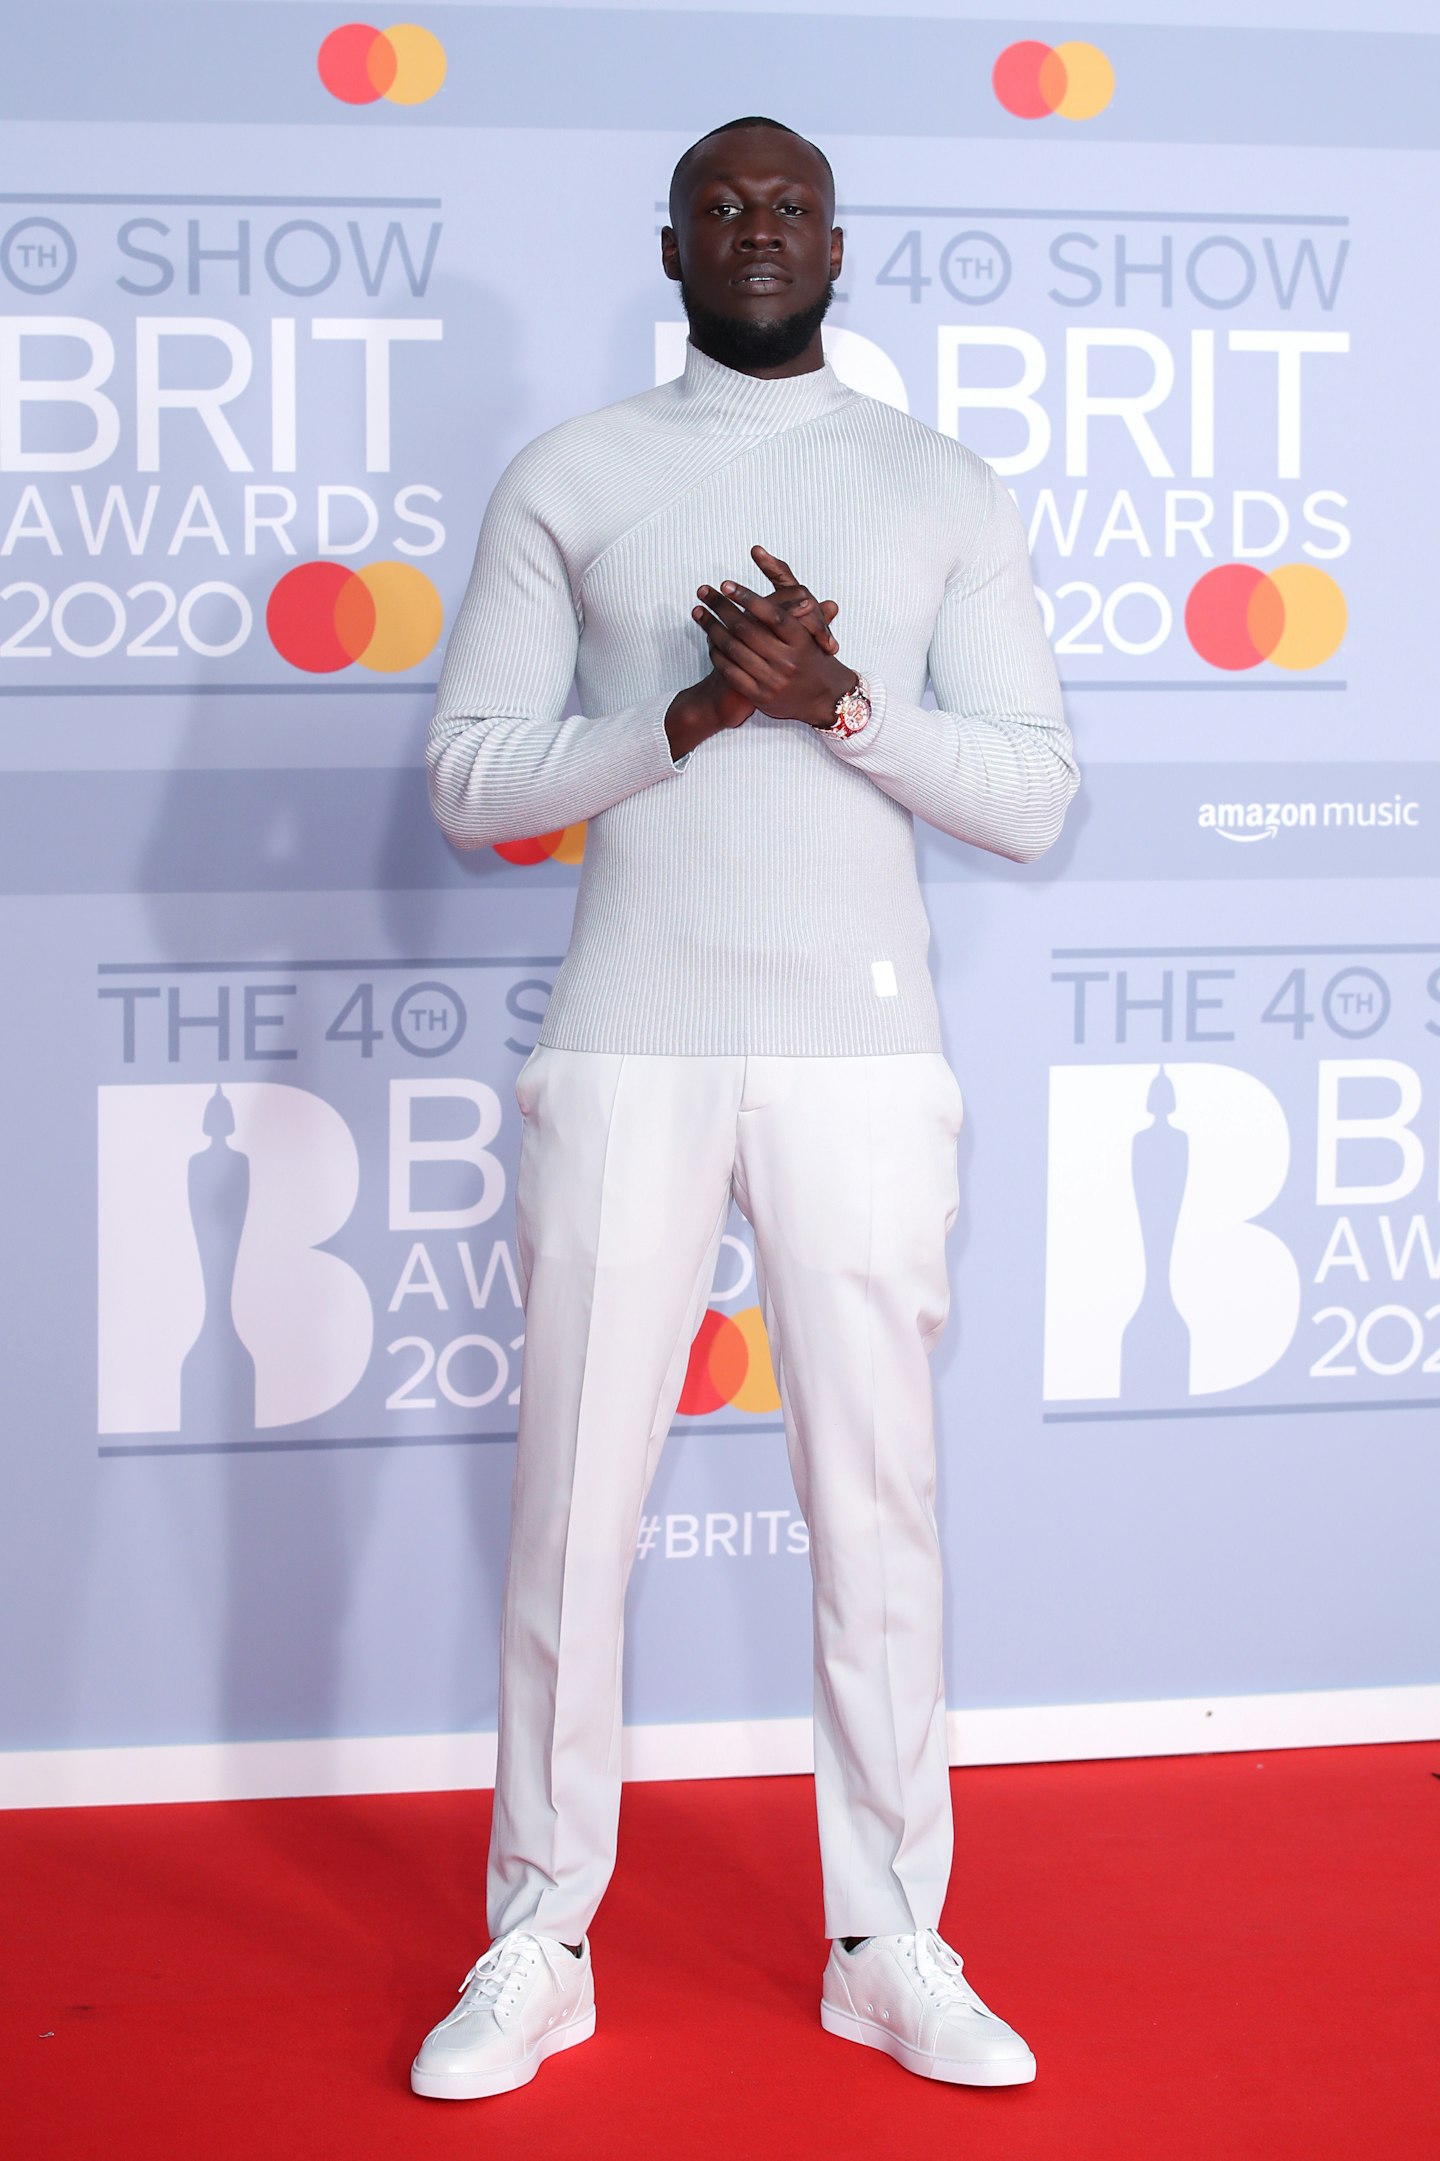 Stormzy, who was one of the night's performers